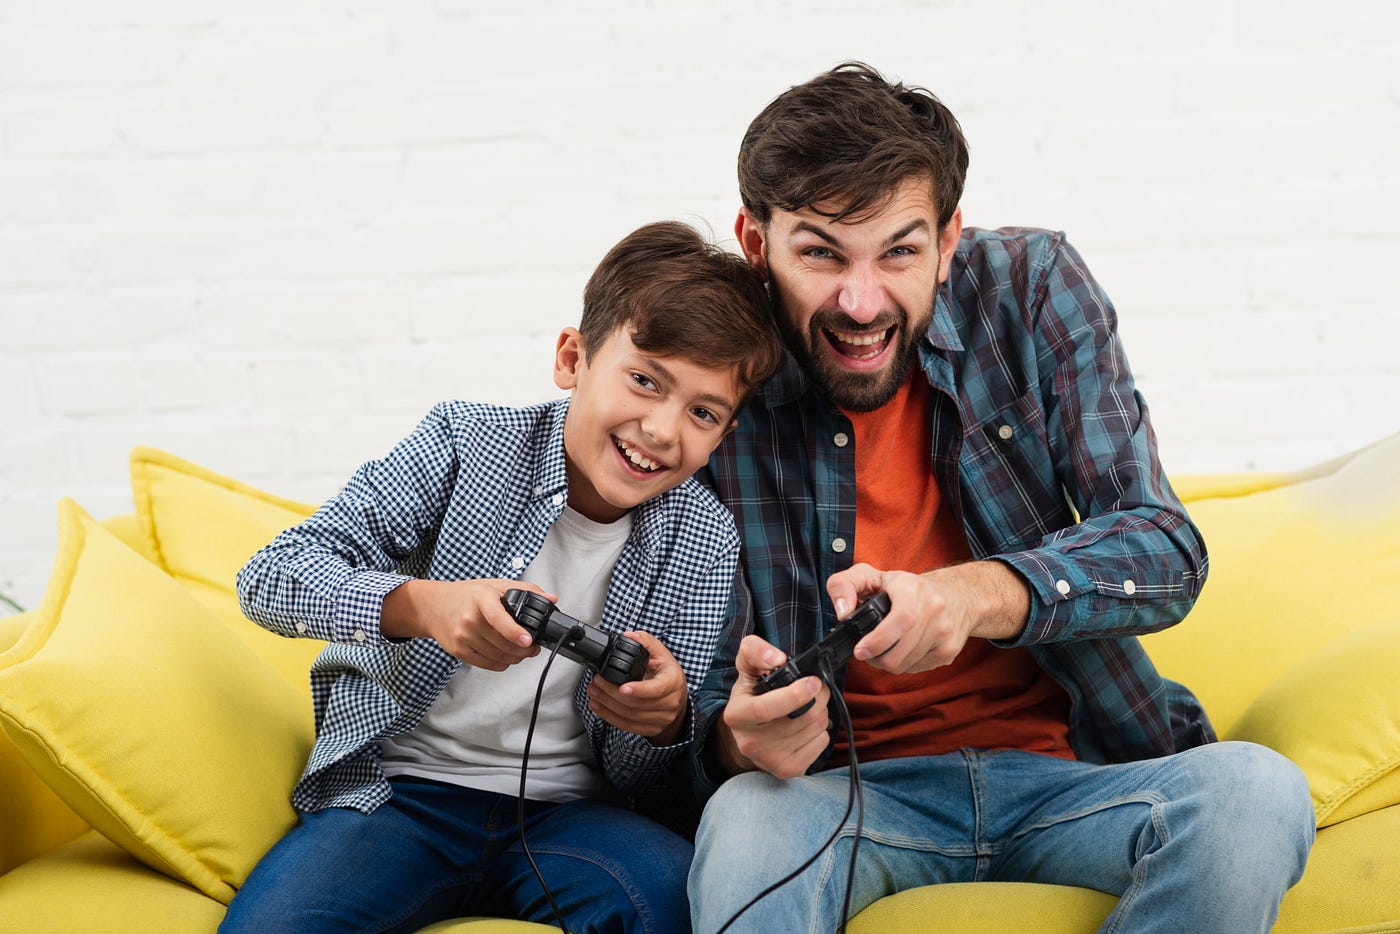 Playing video games may improve your memory and attention